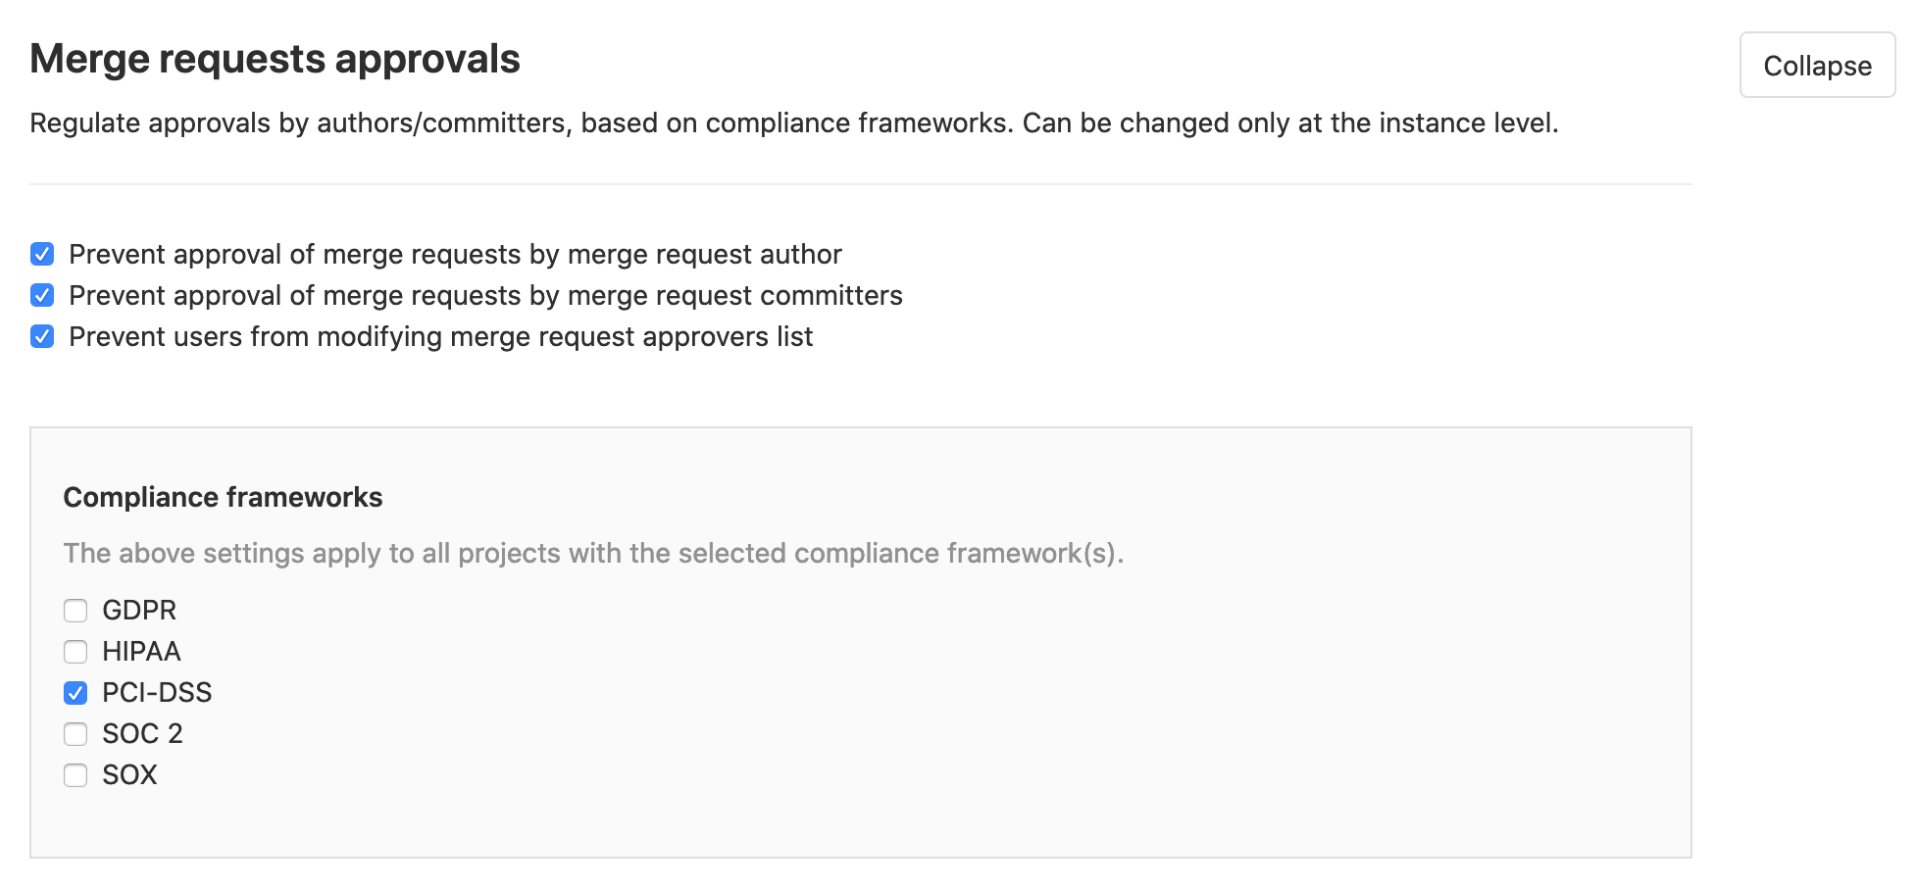 Scope instance-level merge request settings to compliance-labeled projects